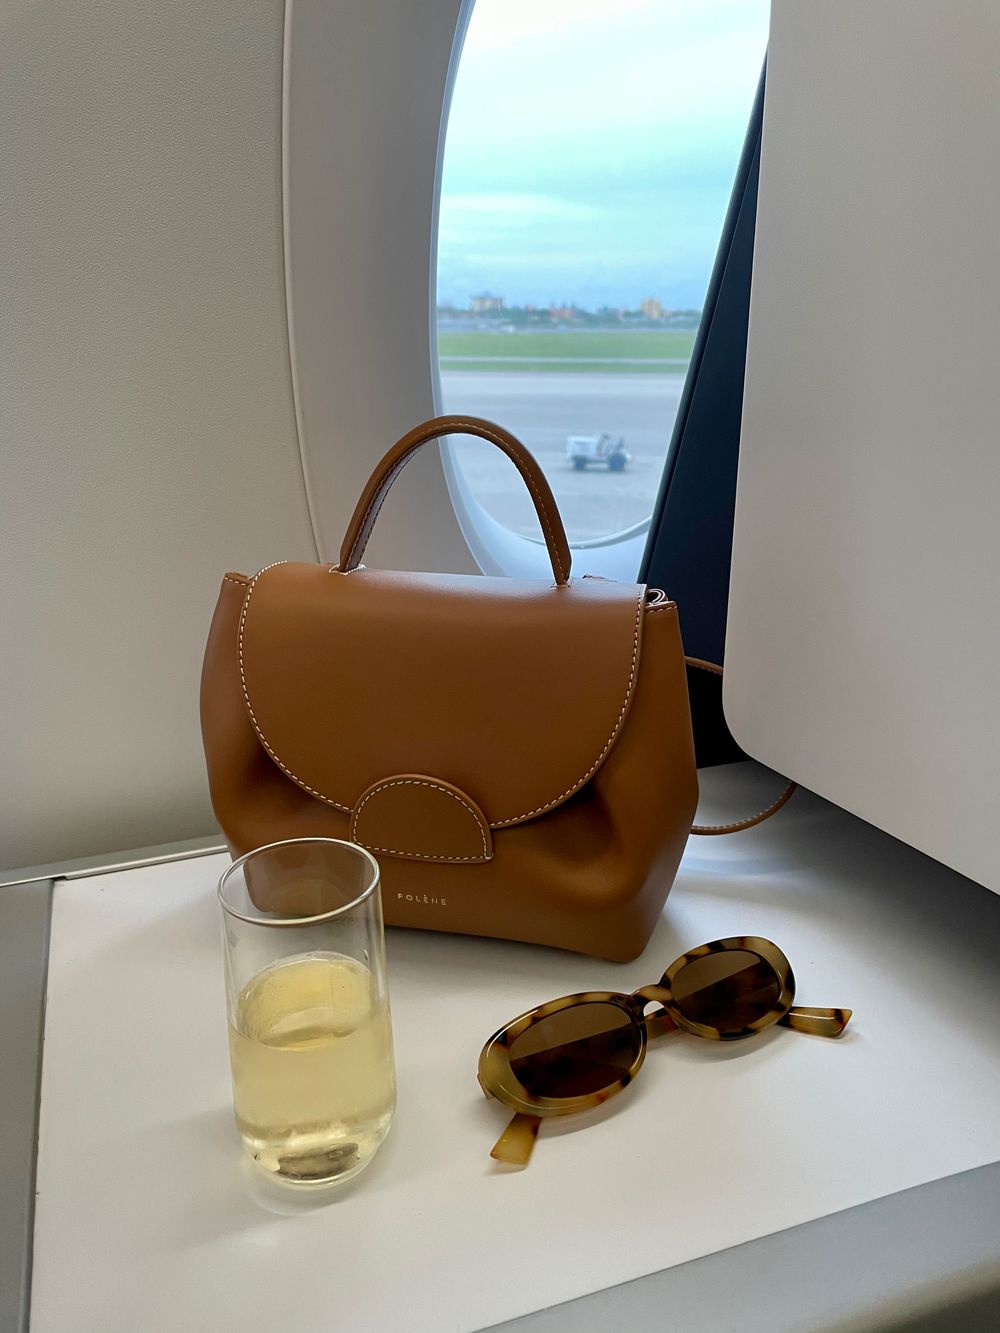 Air France Business Class A350 Review Champagne glass at takeoff